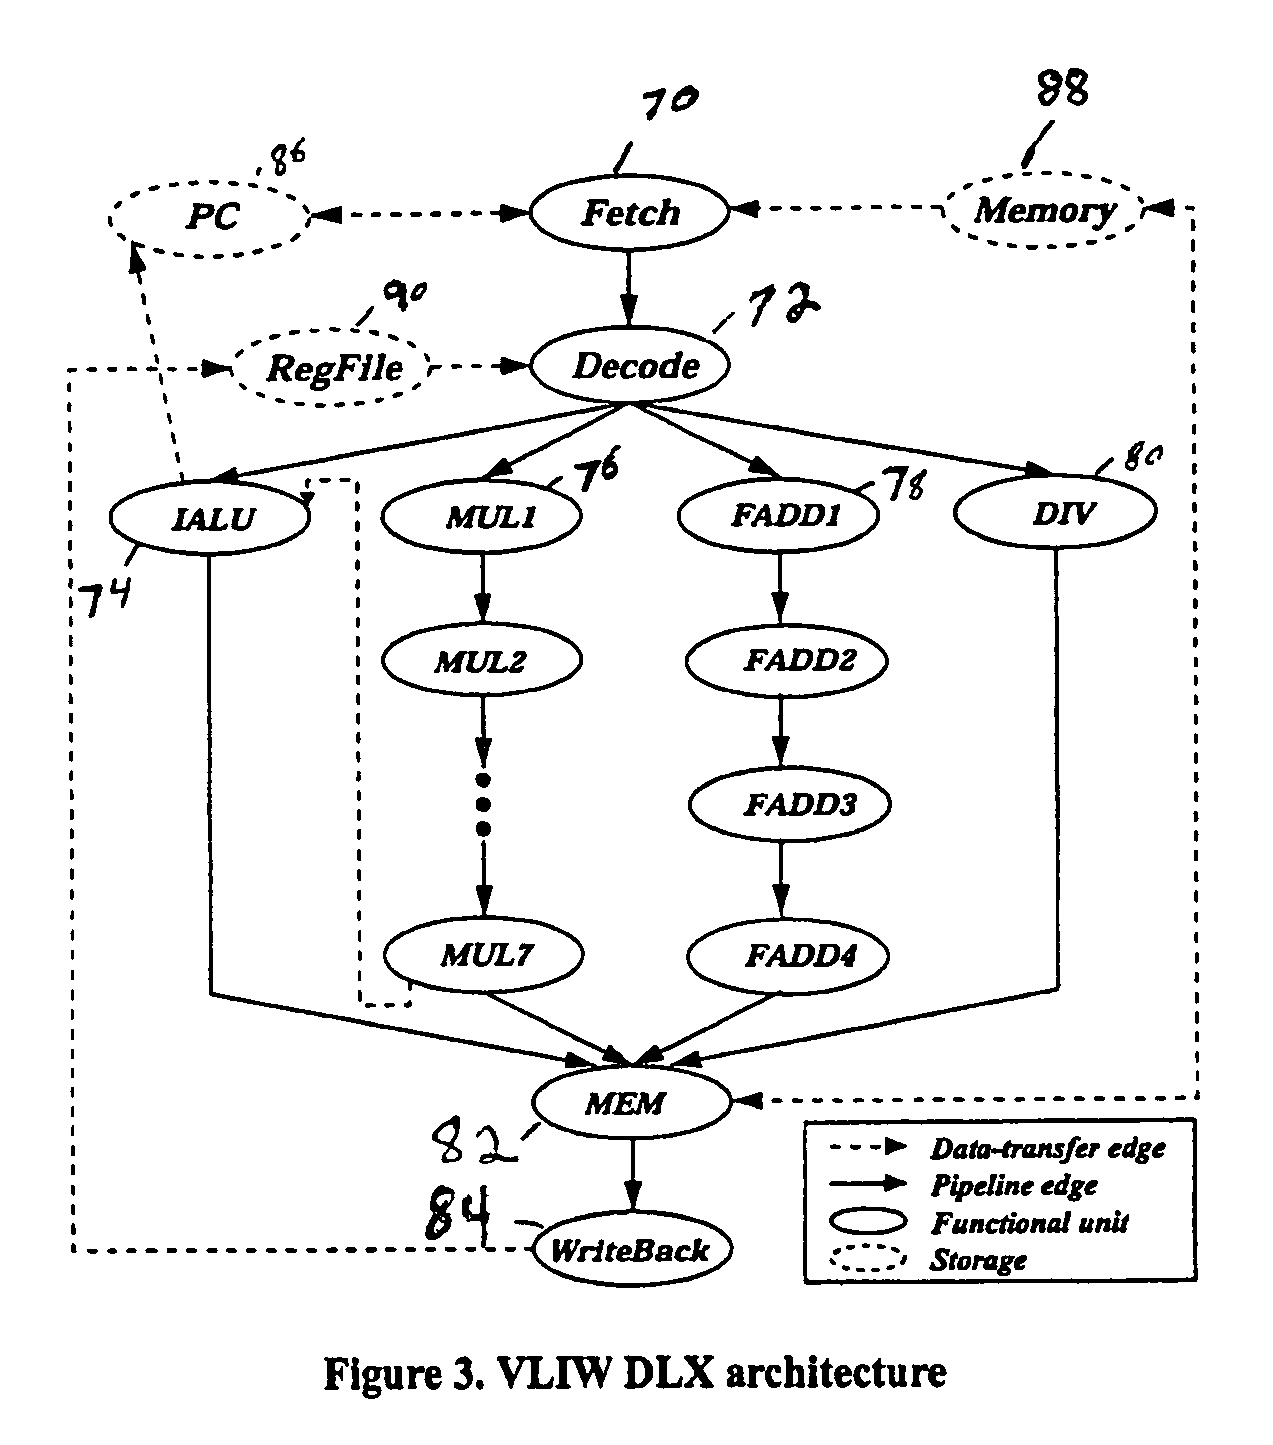 Functional coverage driven test generation for validation of pipelined processors